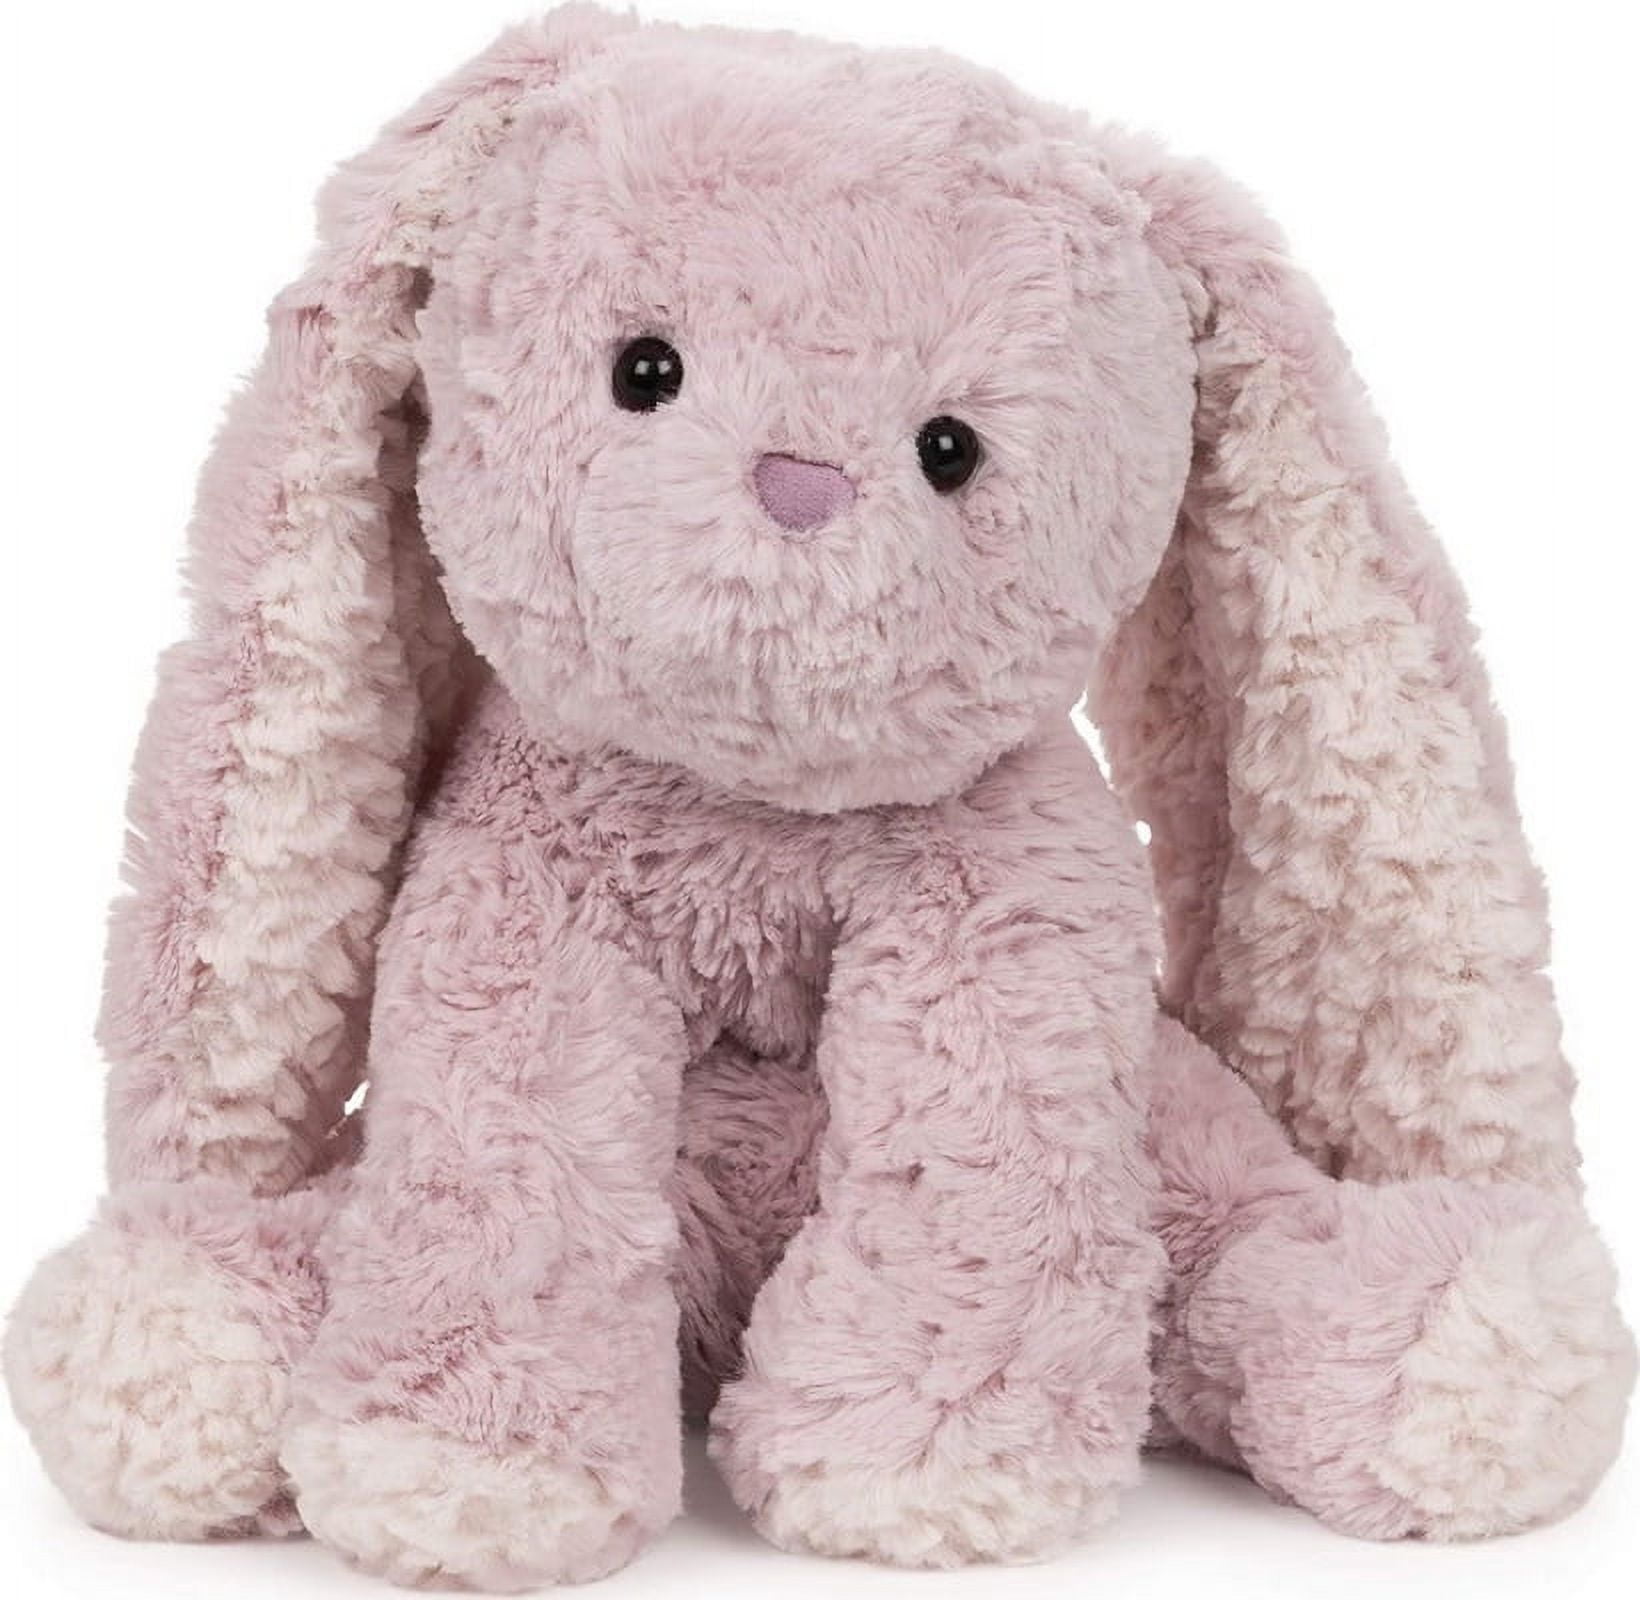 GUND Cozys Collection Bunny Plush Soft Stuffed Animal for Ages 1 and Up,  10 